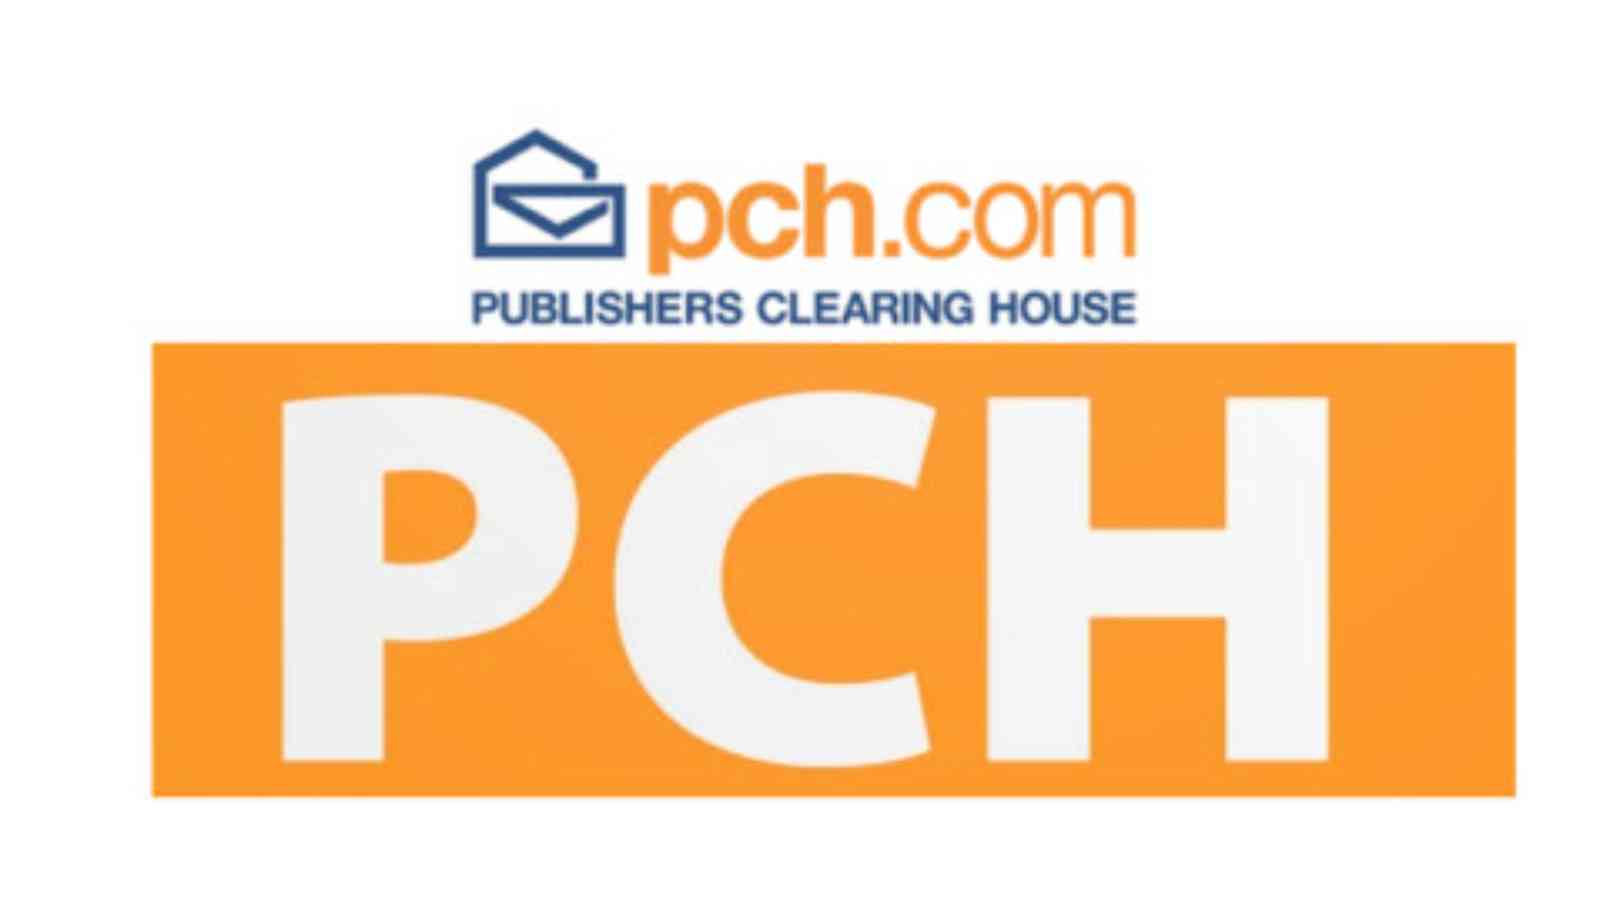 Pch.com Final Code: How To Enter and Activate the Code in 2023?